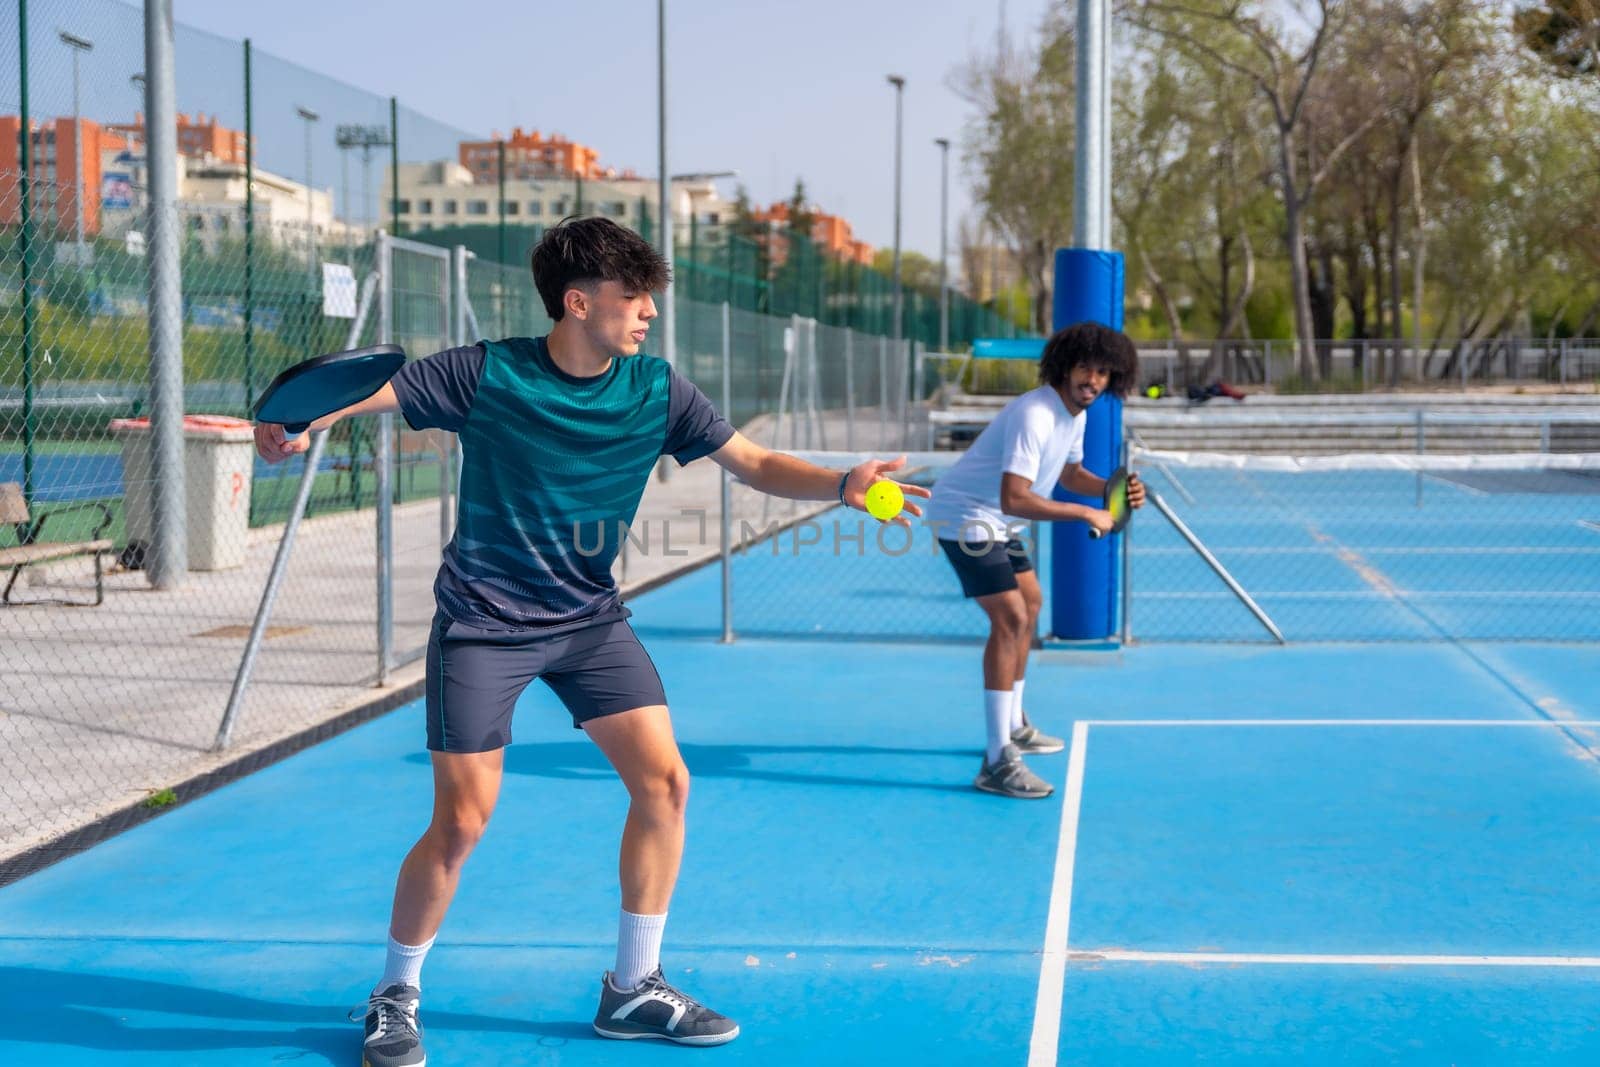 Man serving ball playing pickleball with partner by Huizi